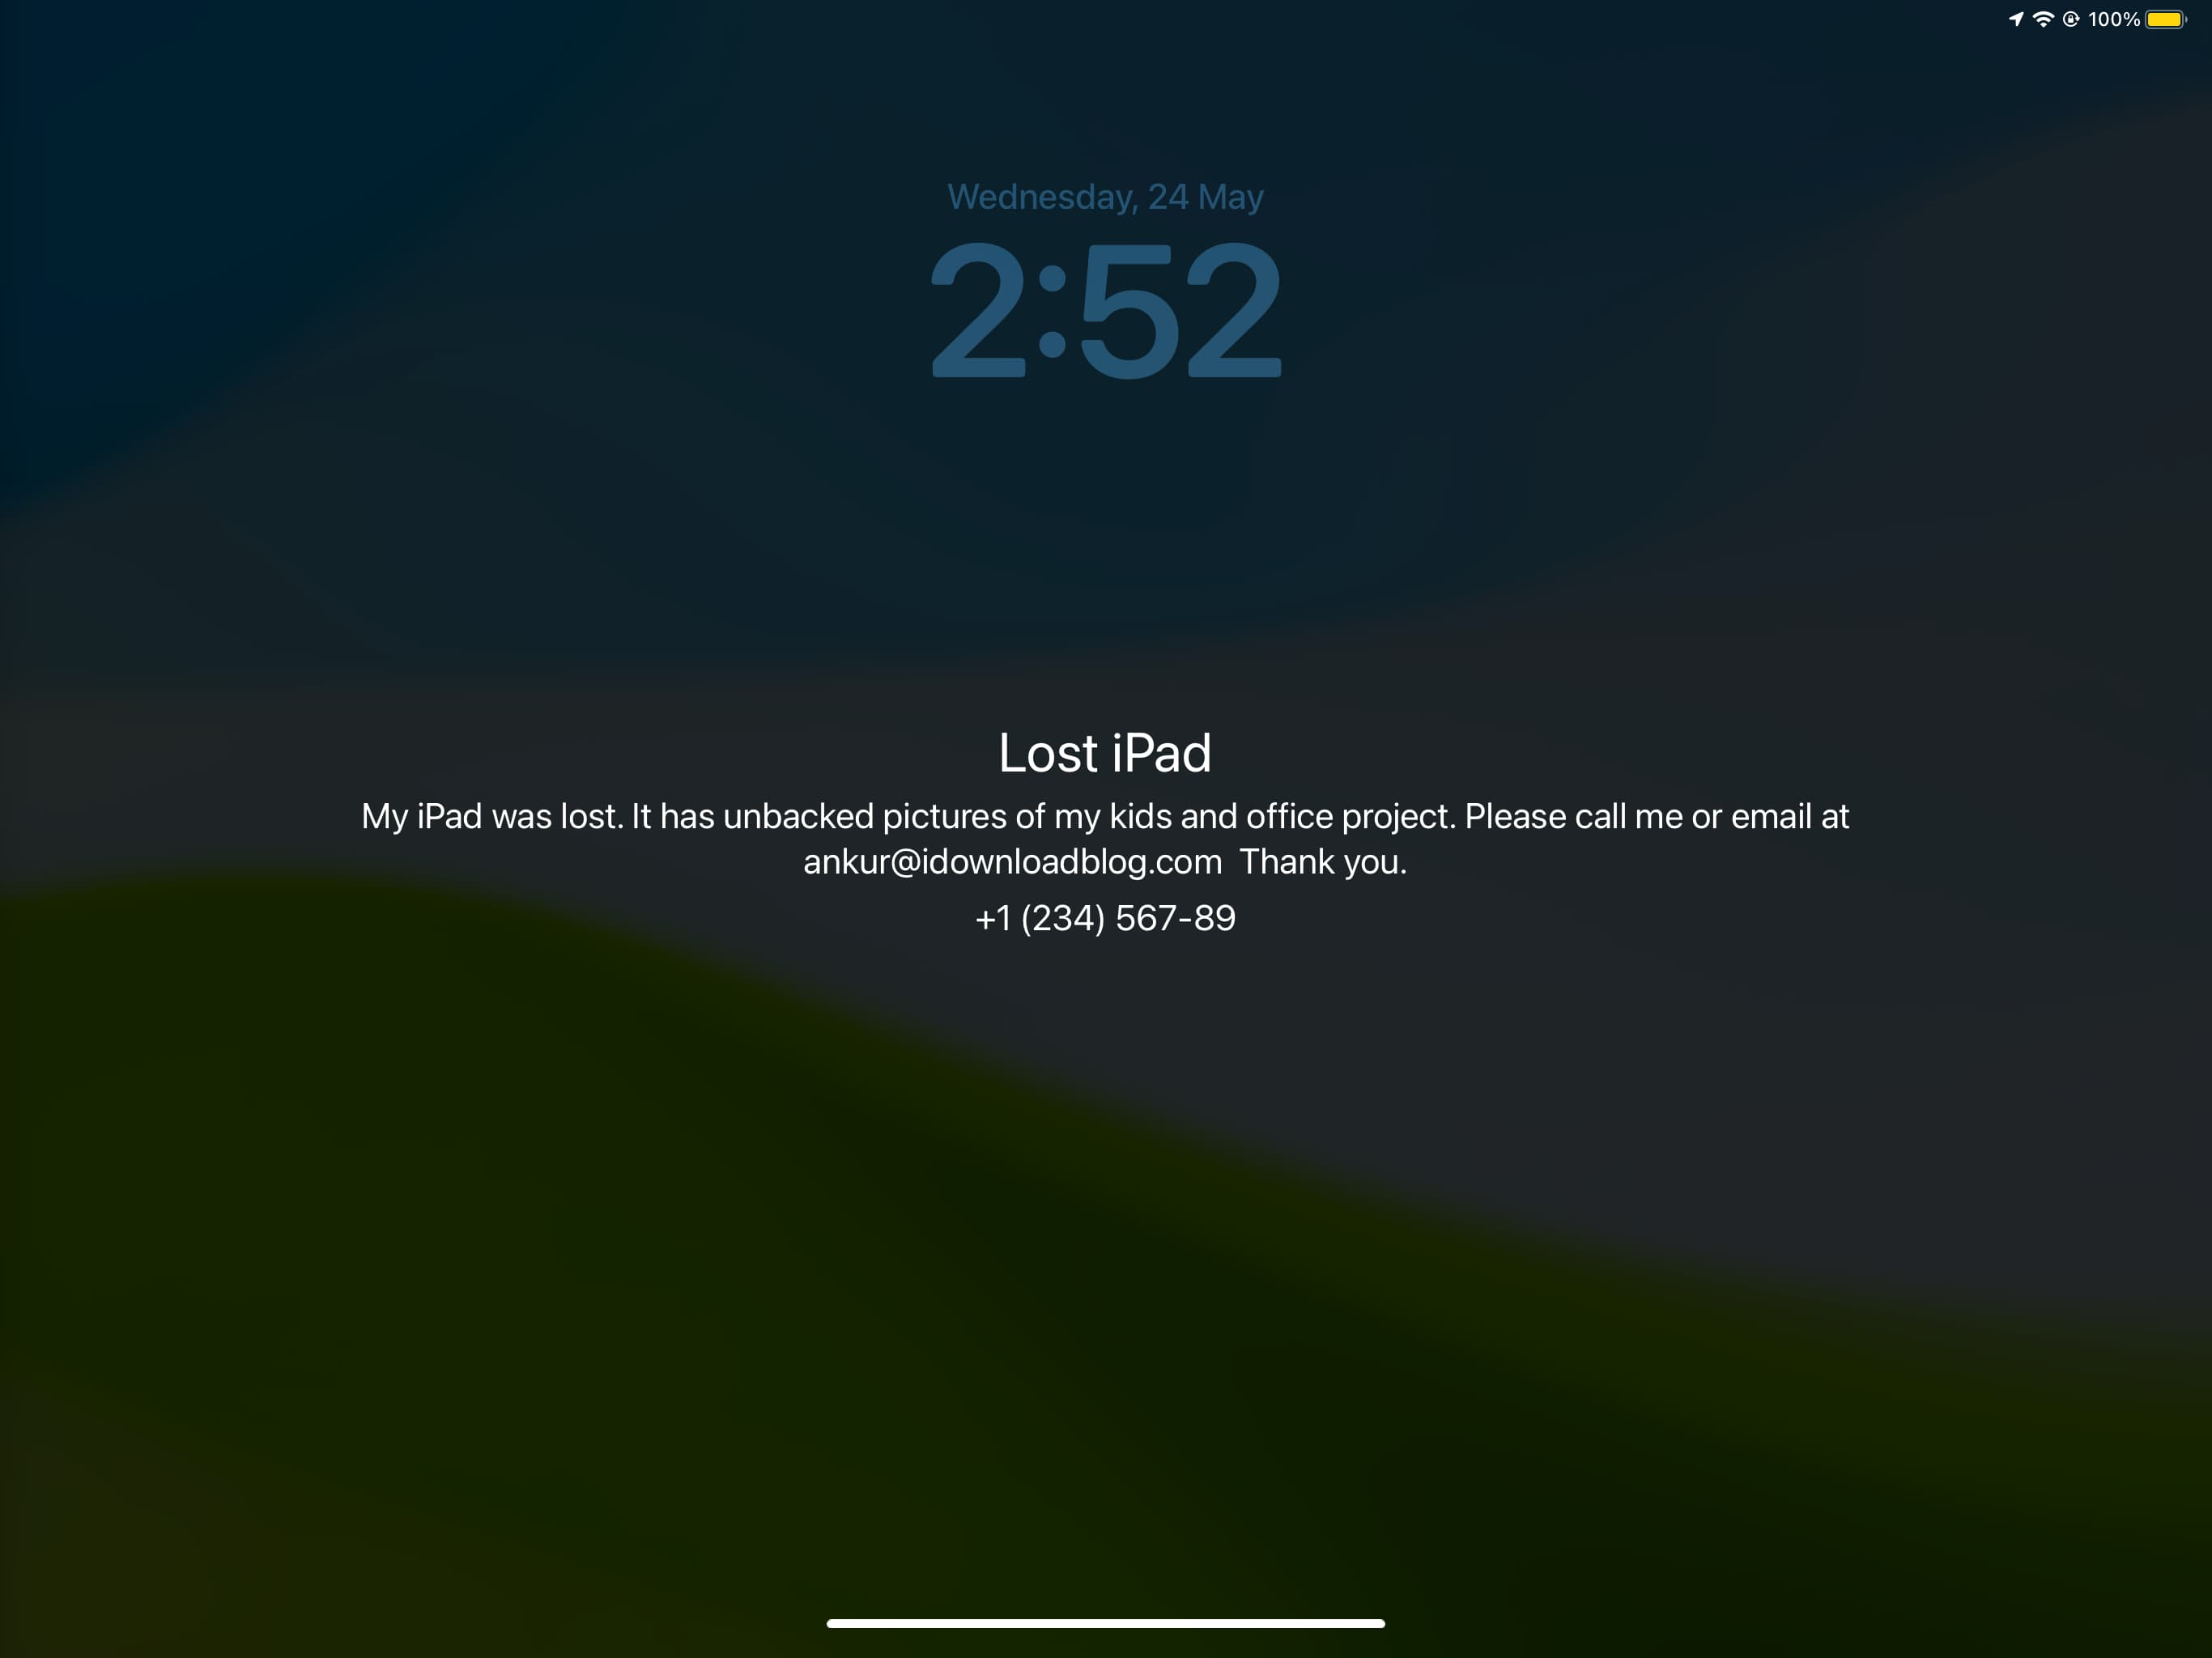 Lost iPad showing user's message and phone number on Lock Screen